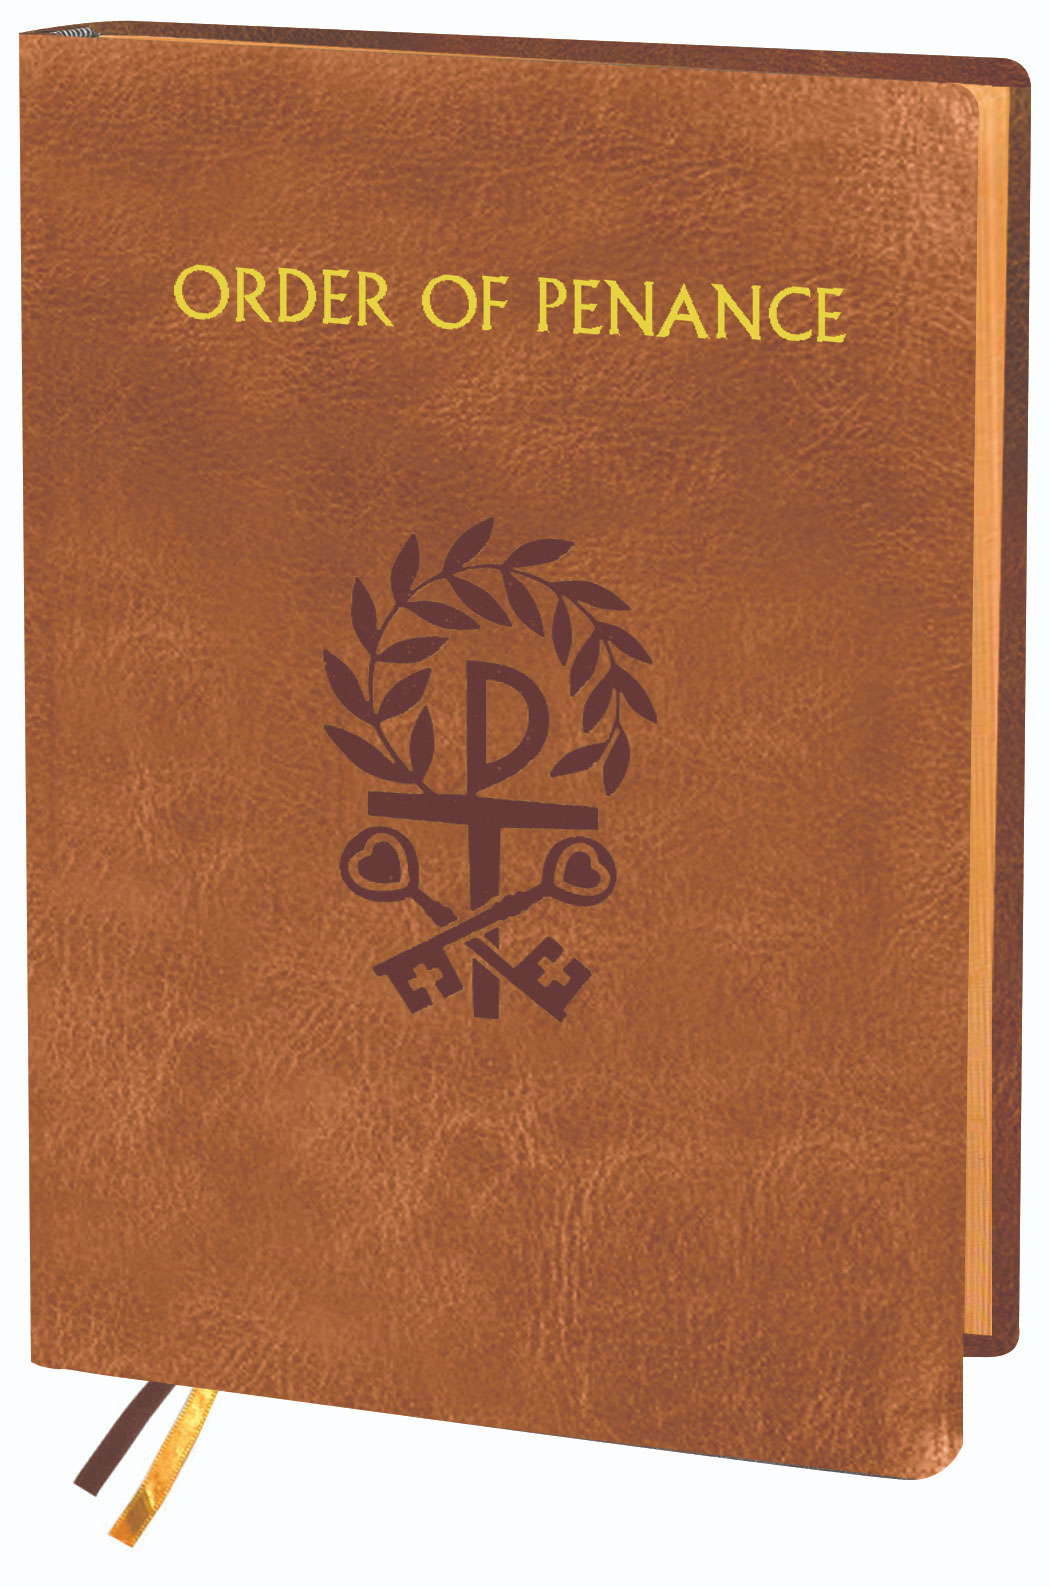 Order of Penance - 2nd Edition